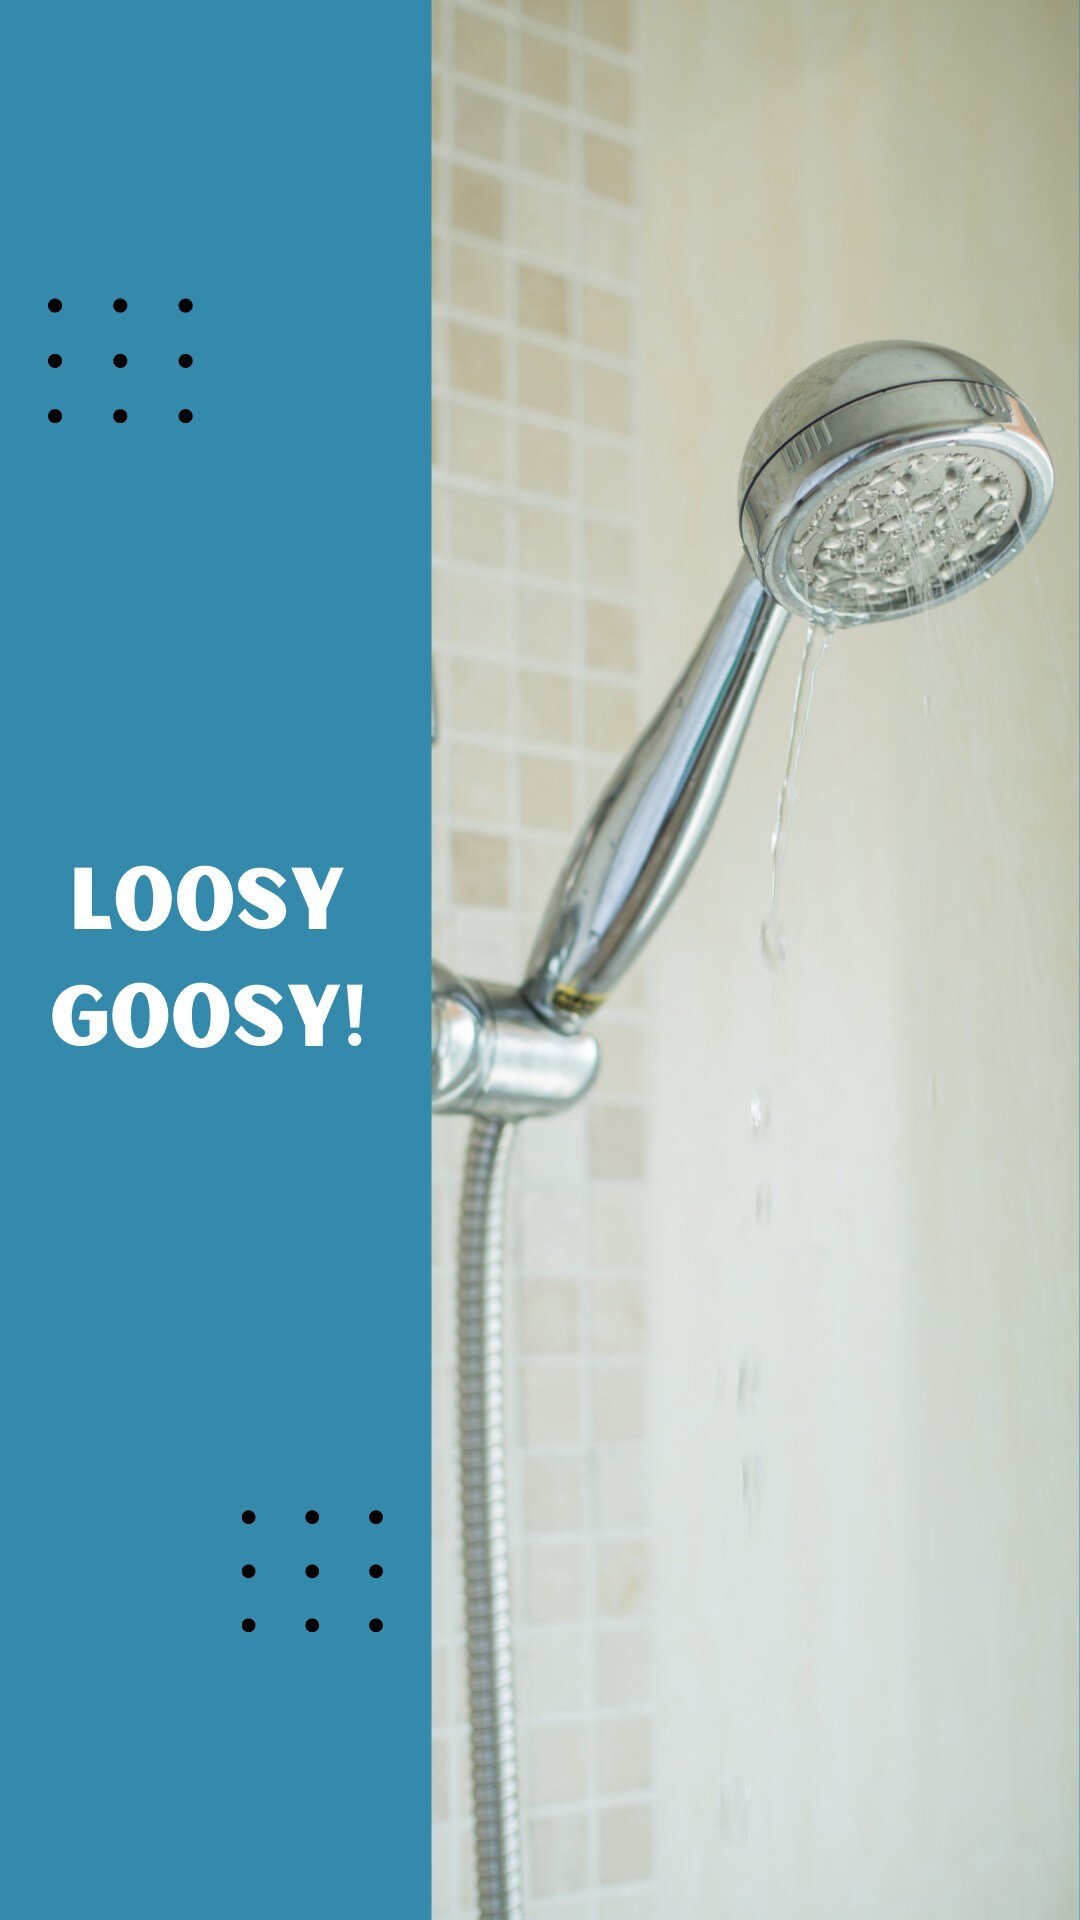 Some things just aren&rsquo;t meant to wobble around. 

For example, something you (hopefully) use every day, but never think about: 

Your showerhead. 

If you have a wobbly showerhead, or even some wobbly pipes &ndash; here a tip for you:

The secr